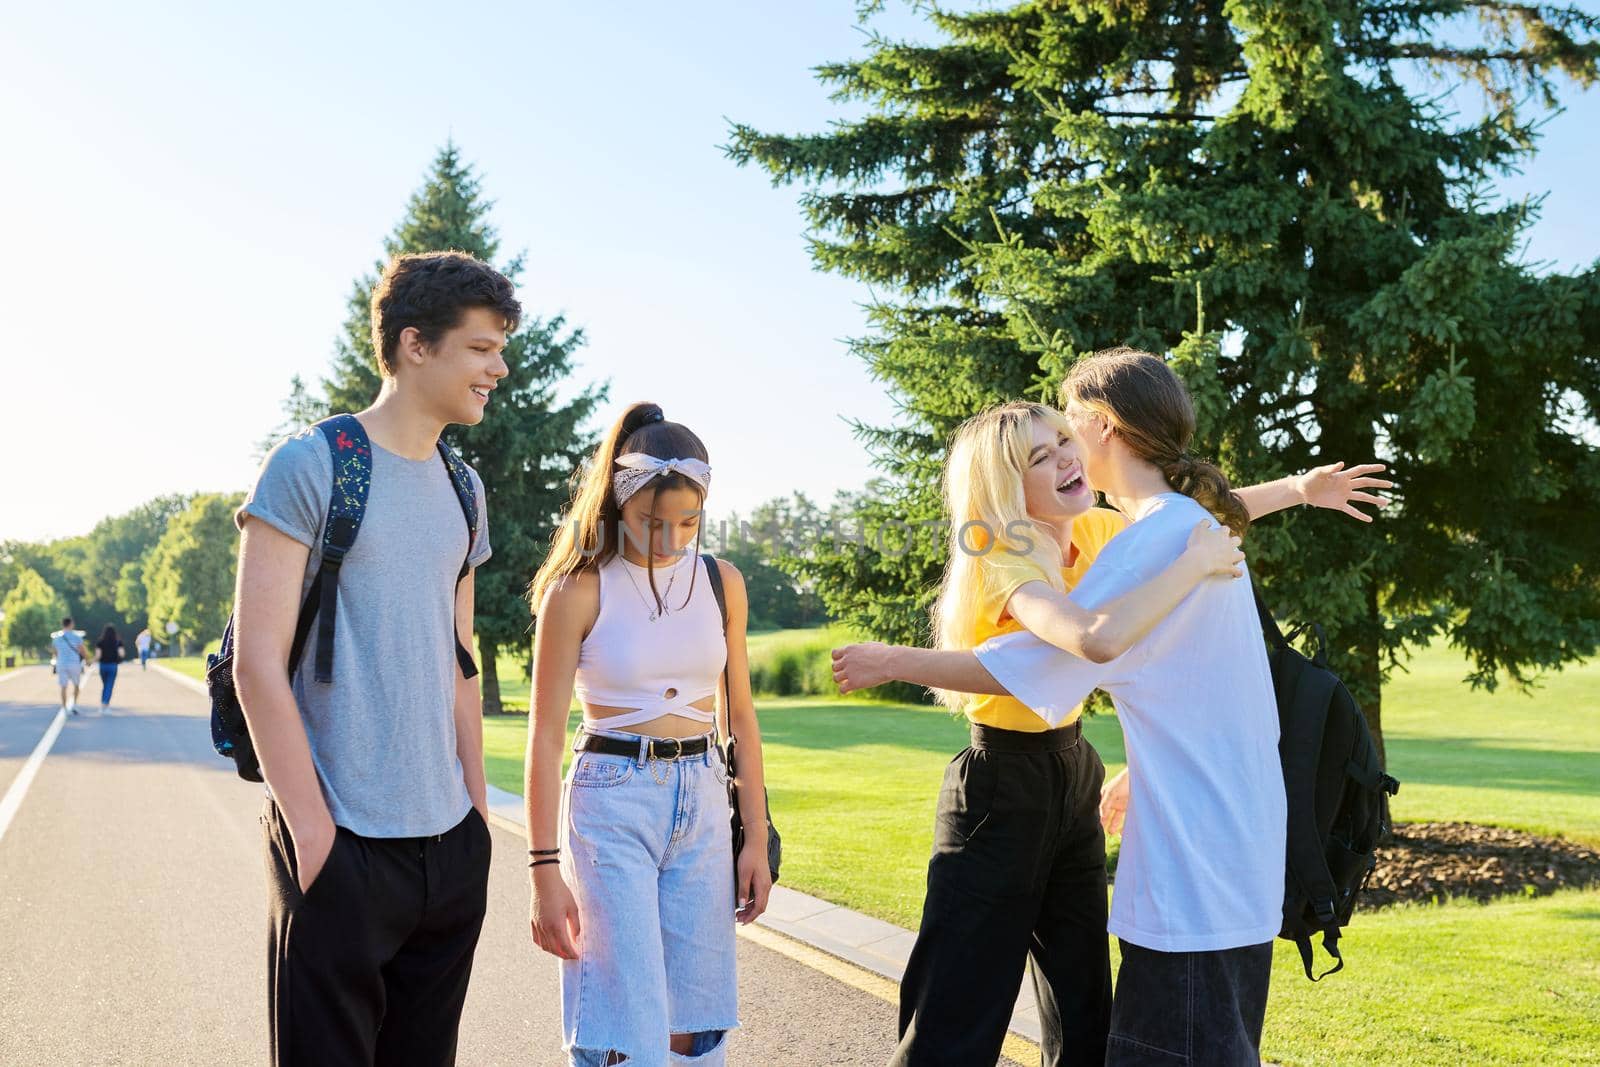 Meeting of smiling teenage friends in sunny summer park. Happy young people greeting each other, hugging, laughing, talking. Friendship, adolescence, communication, emotions, youth concept